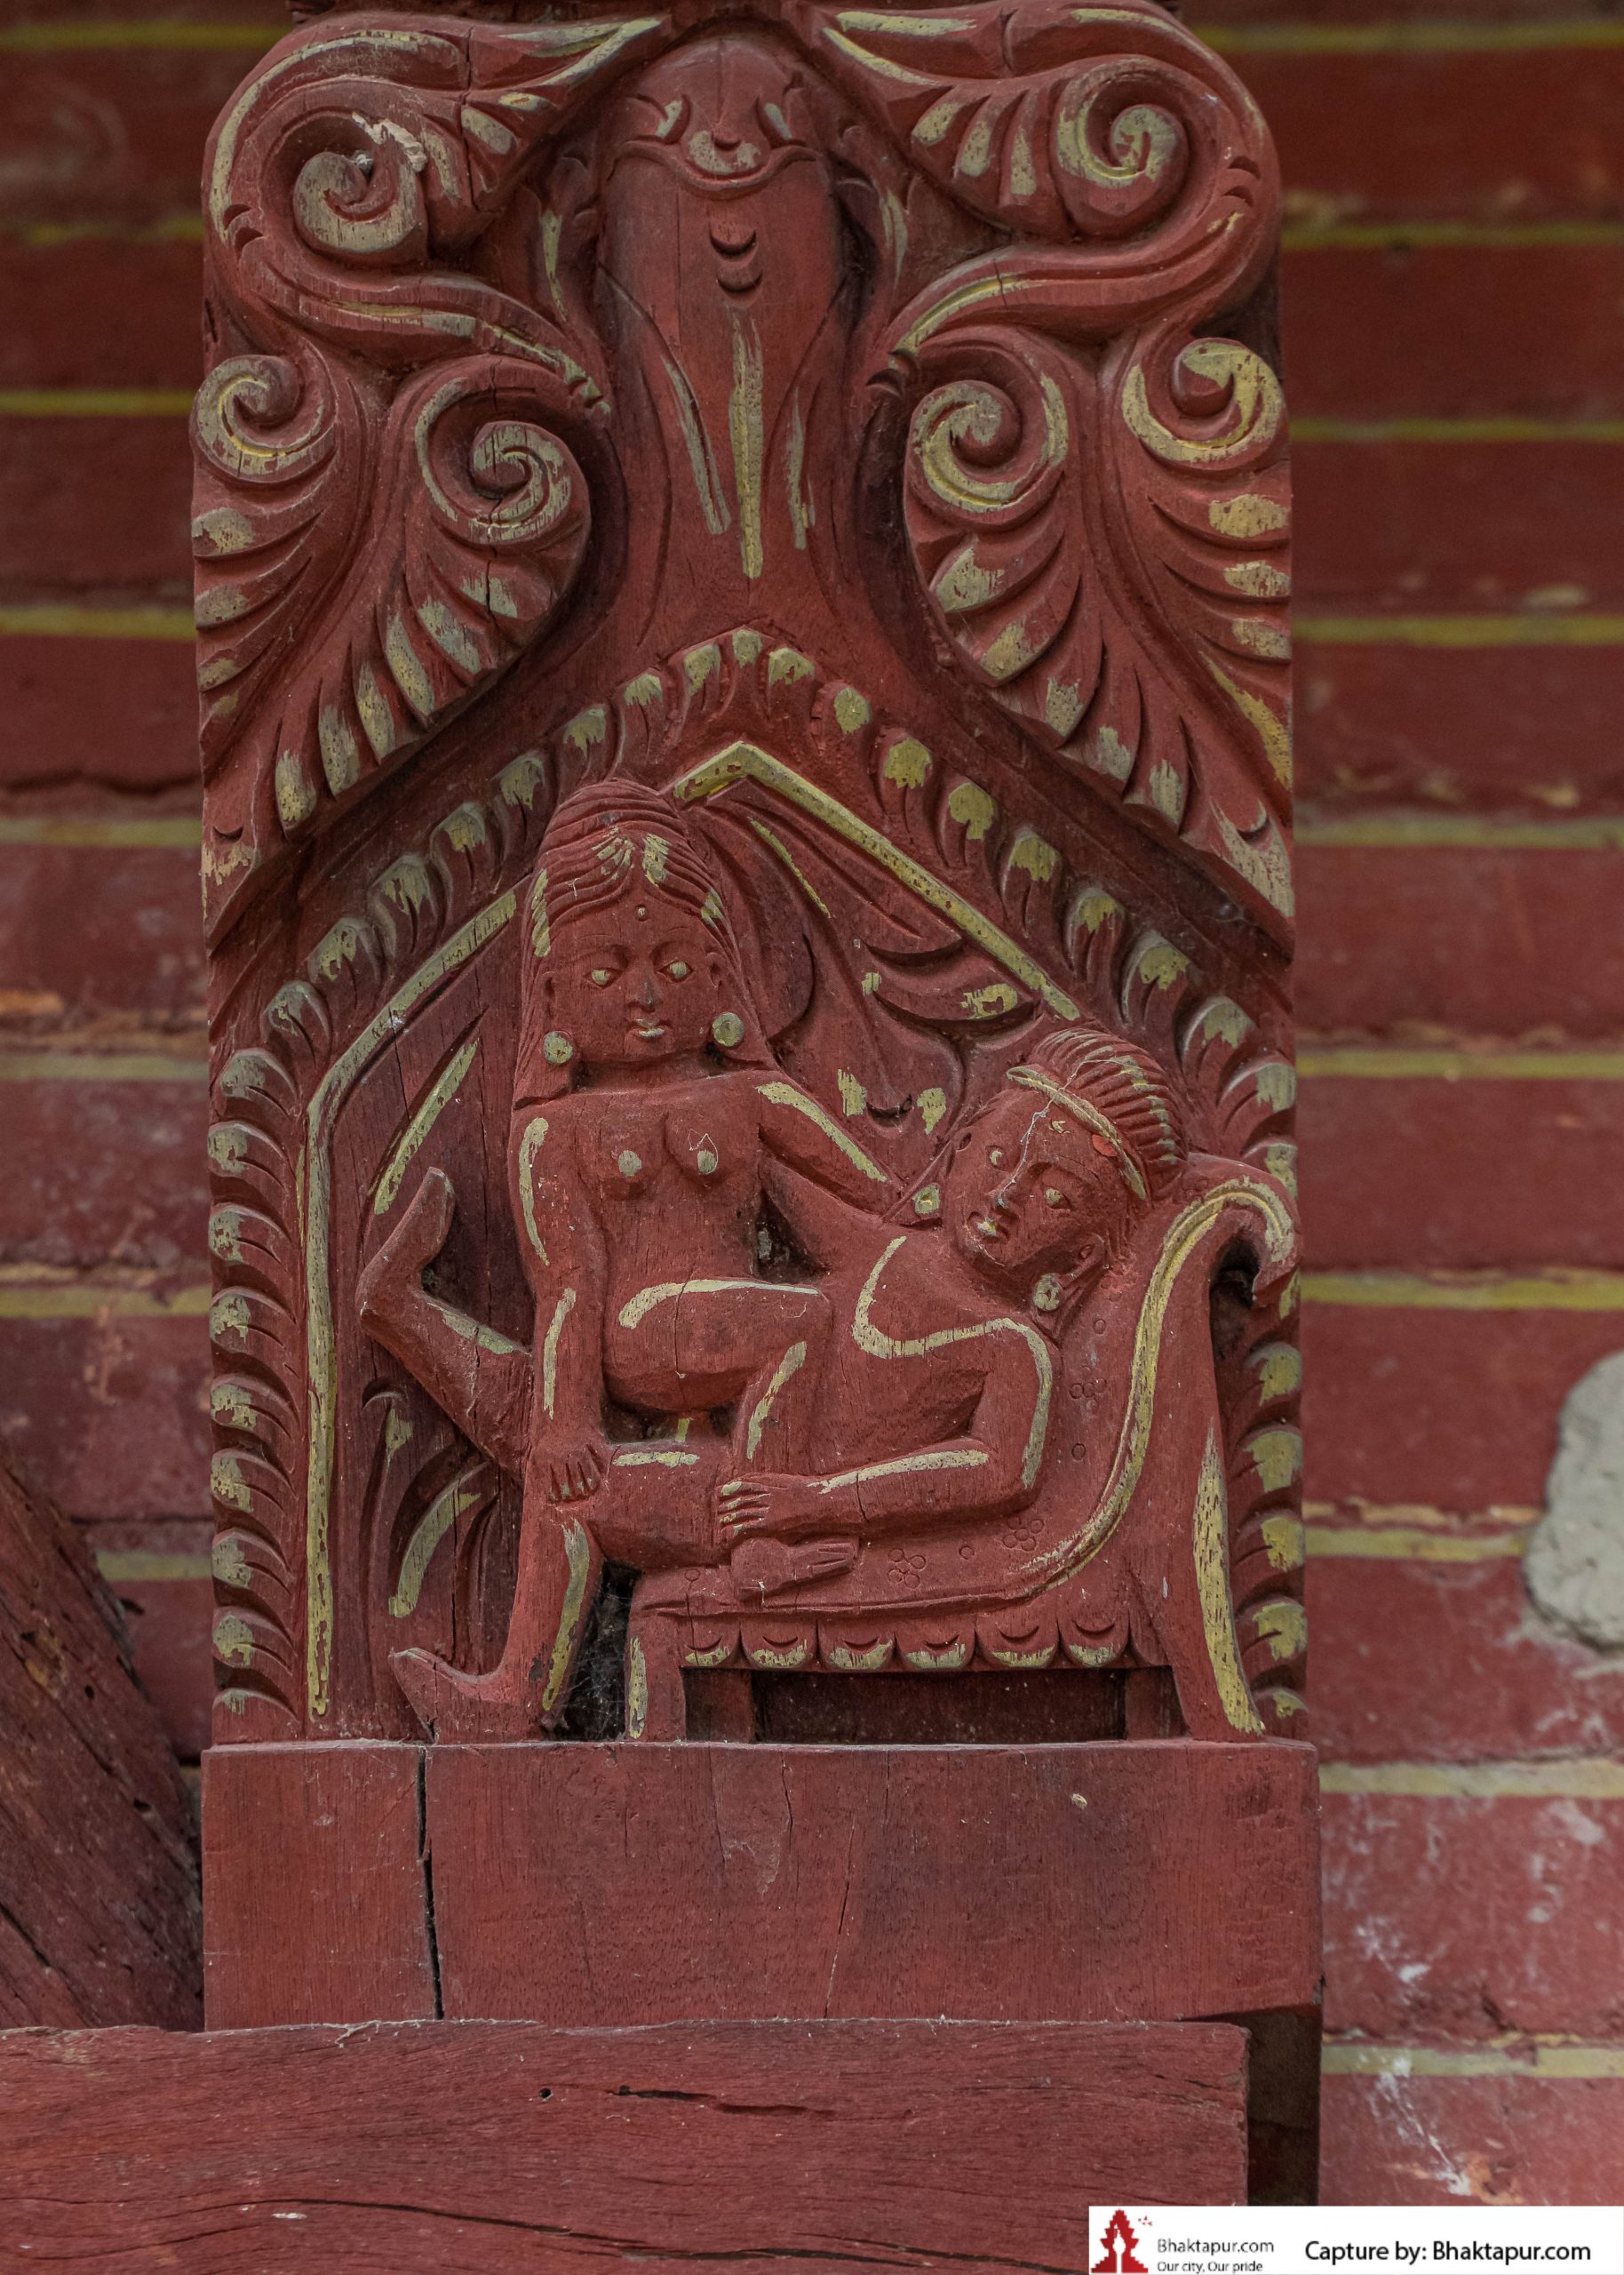 https://www.bhaktapur.com/wp-content/uploads/2021/08/erotic-carving-57-of-137-scaled.jpg